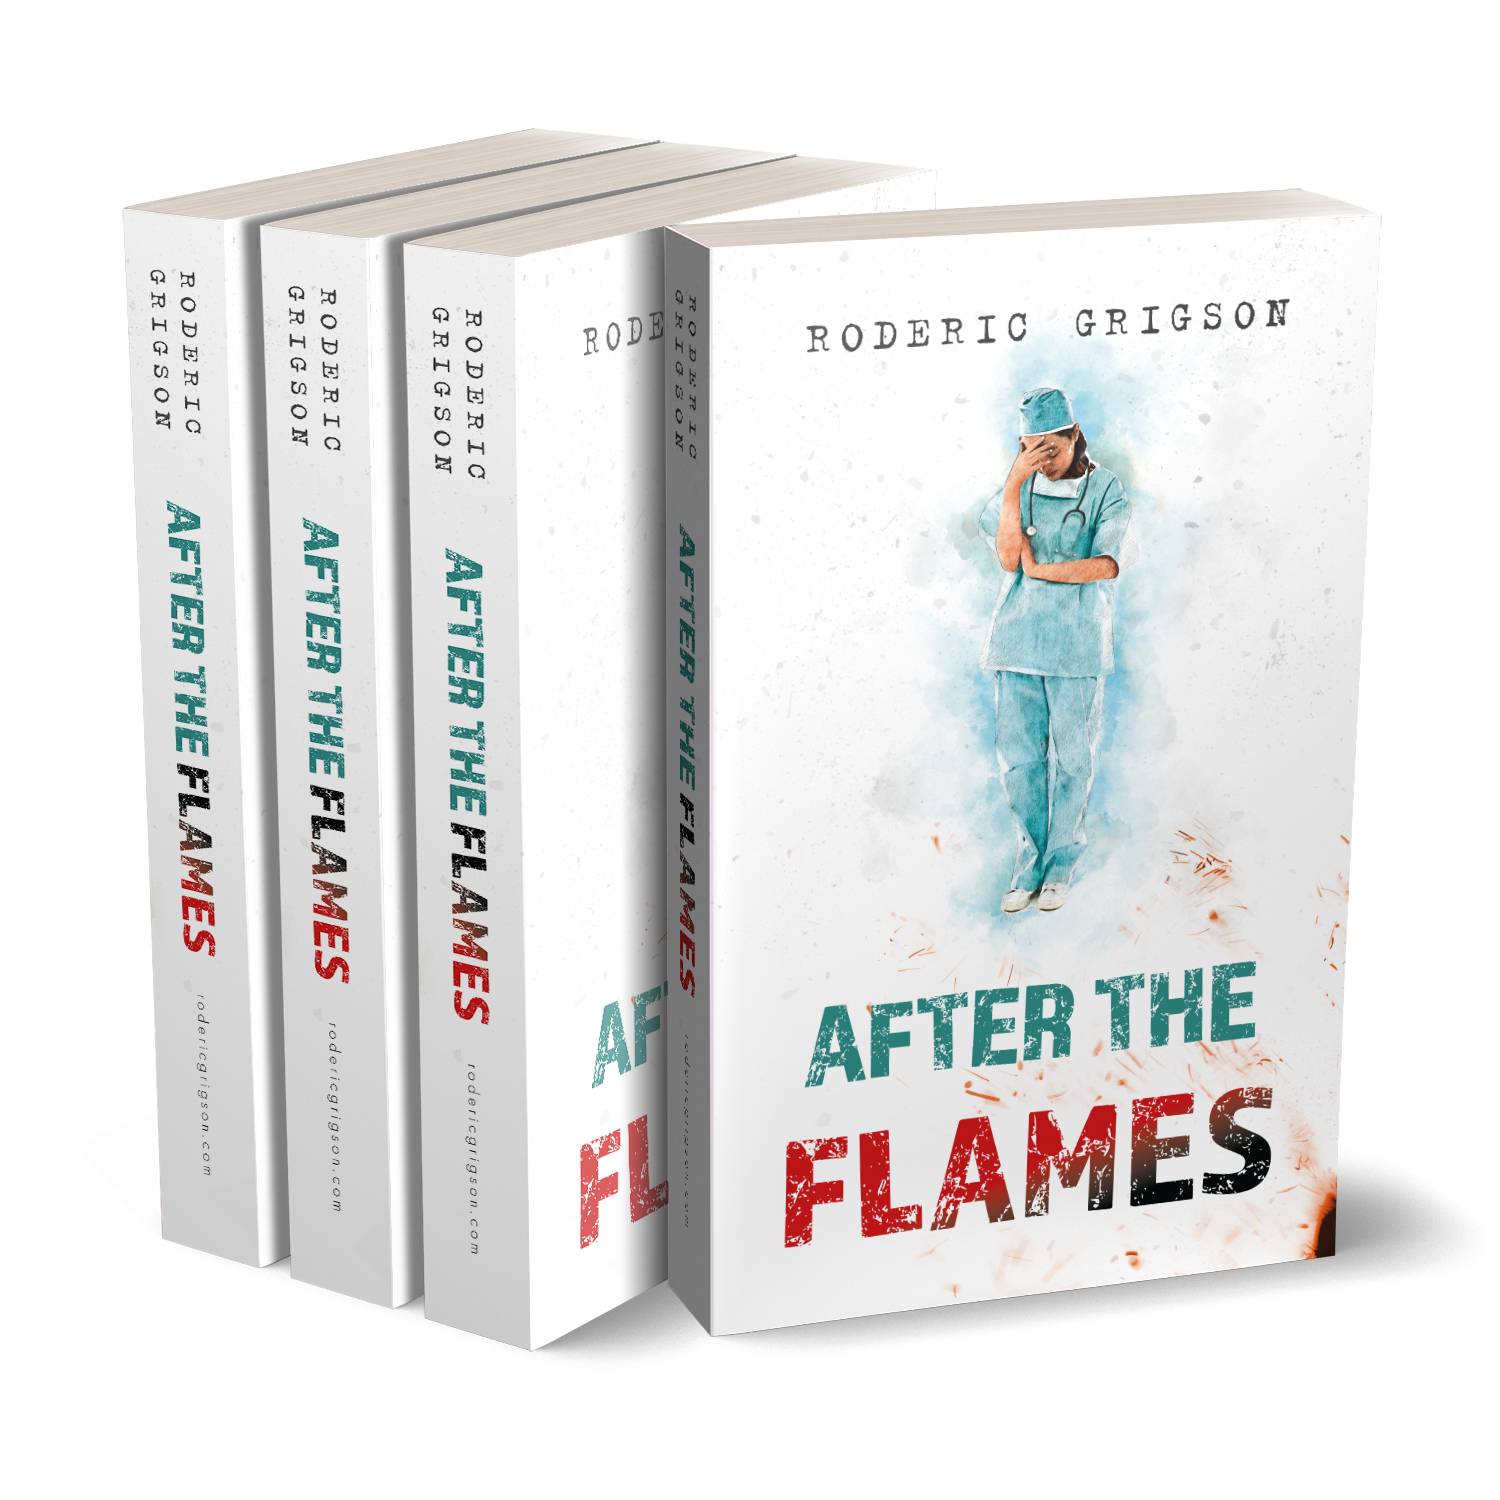 'After The Flames' is realistic dramatic novel by Roderic Grigson, set during the recent Sri Lankan Civil War. The book cover was designed by Mark Thomas, of coverness.com. To find out more about my book design services, please visit www.coverness.com.